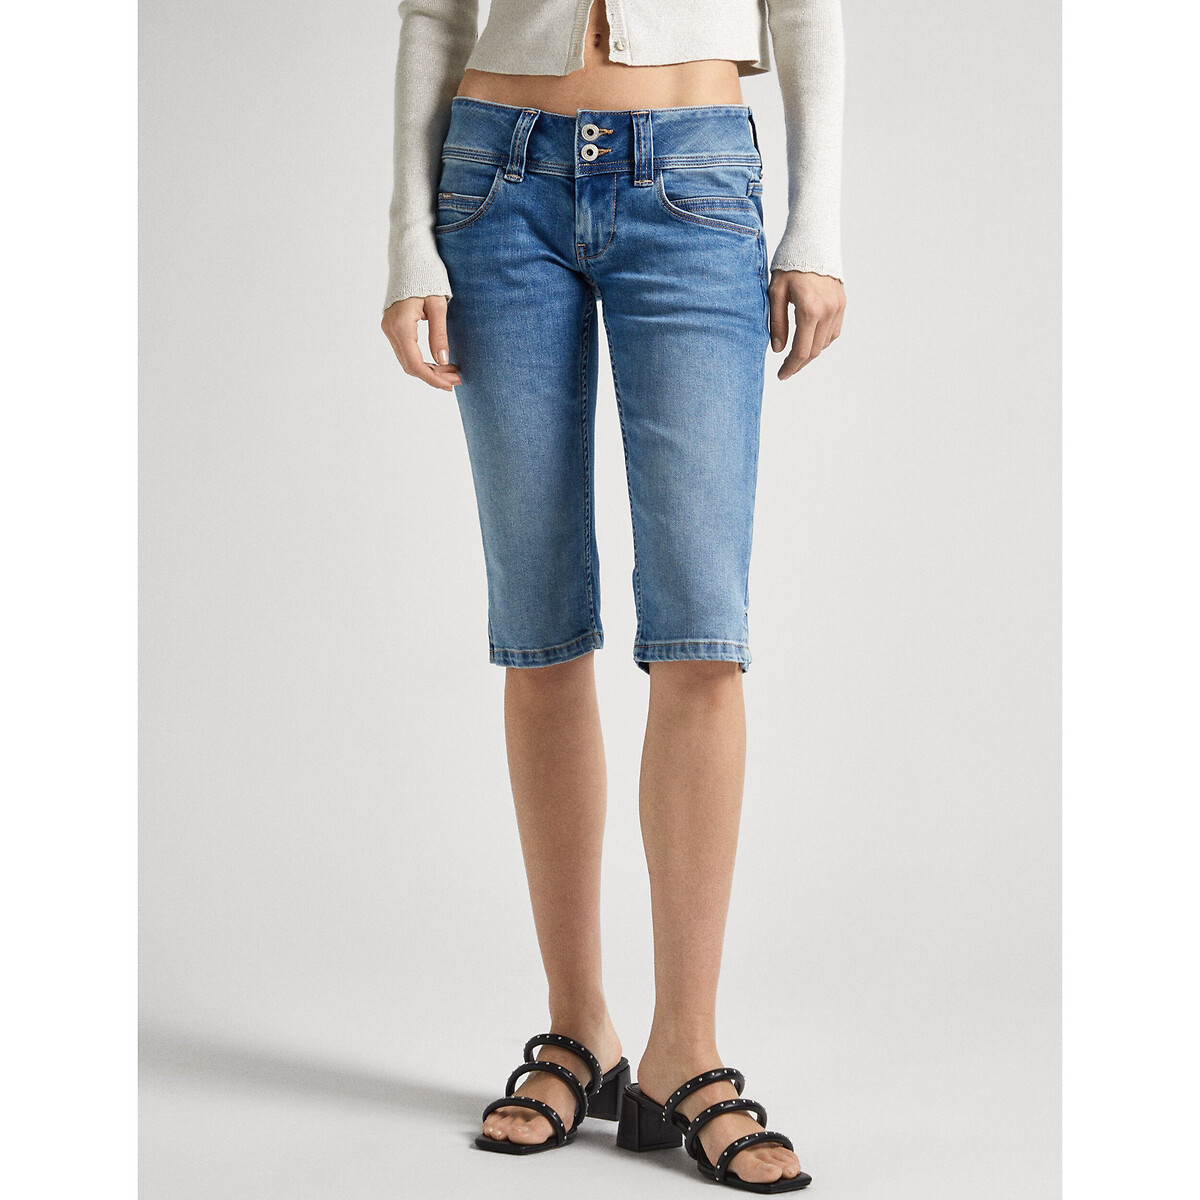 Image of Slim Fit Cropped Jeans in Low Rise